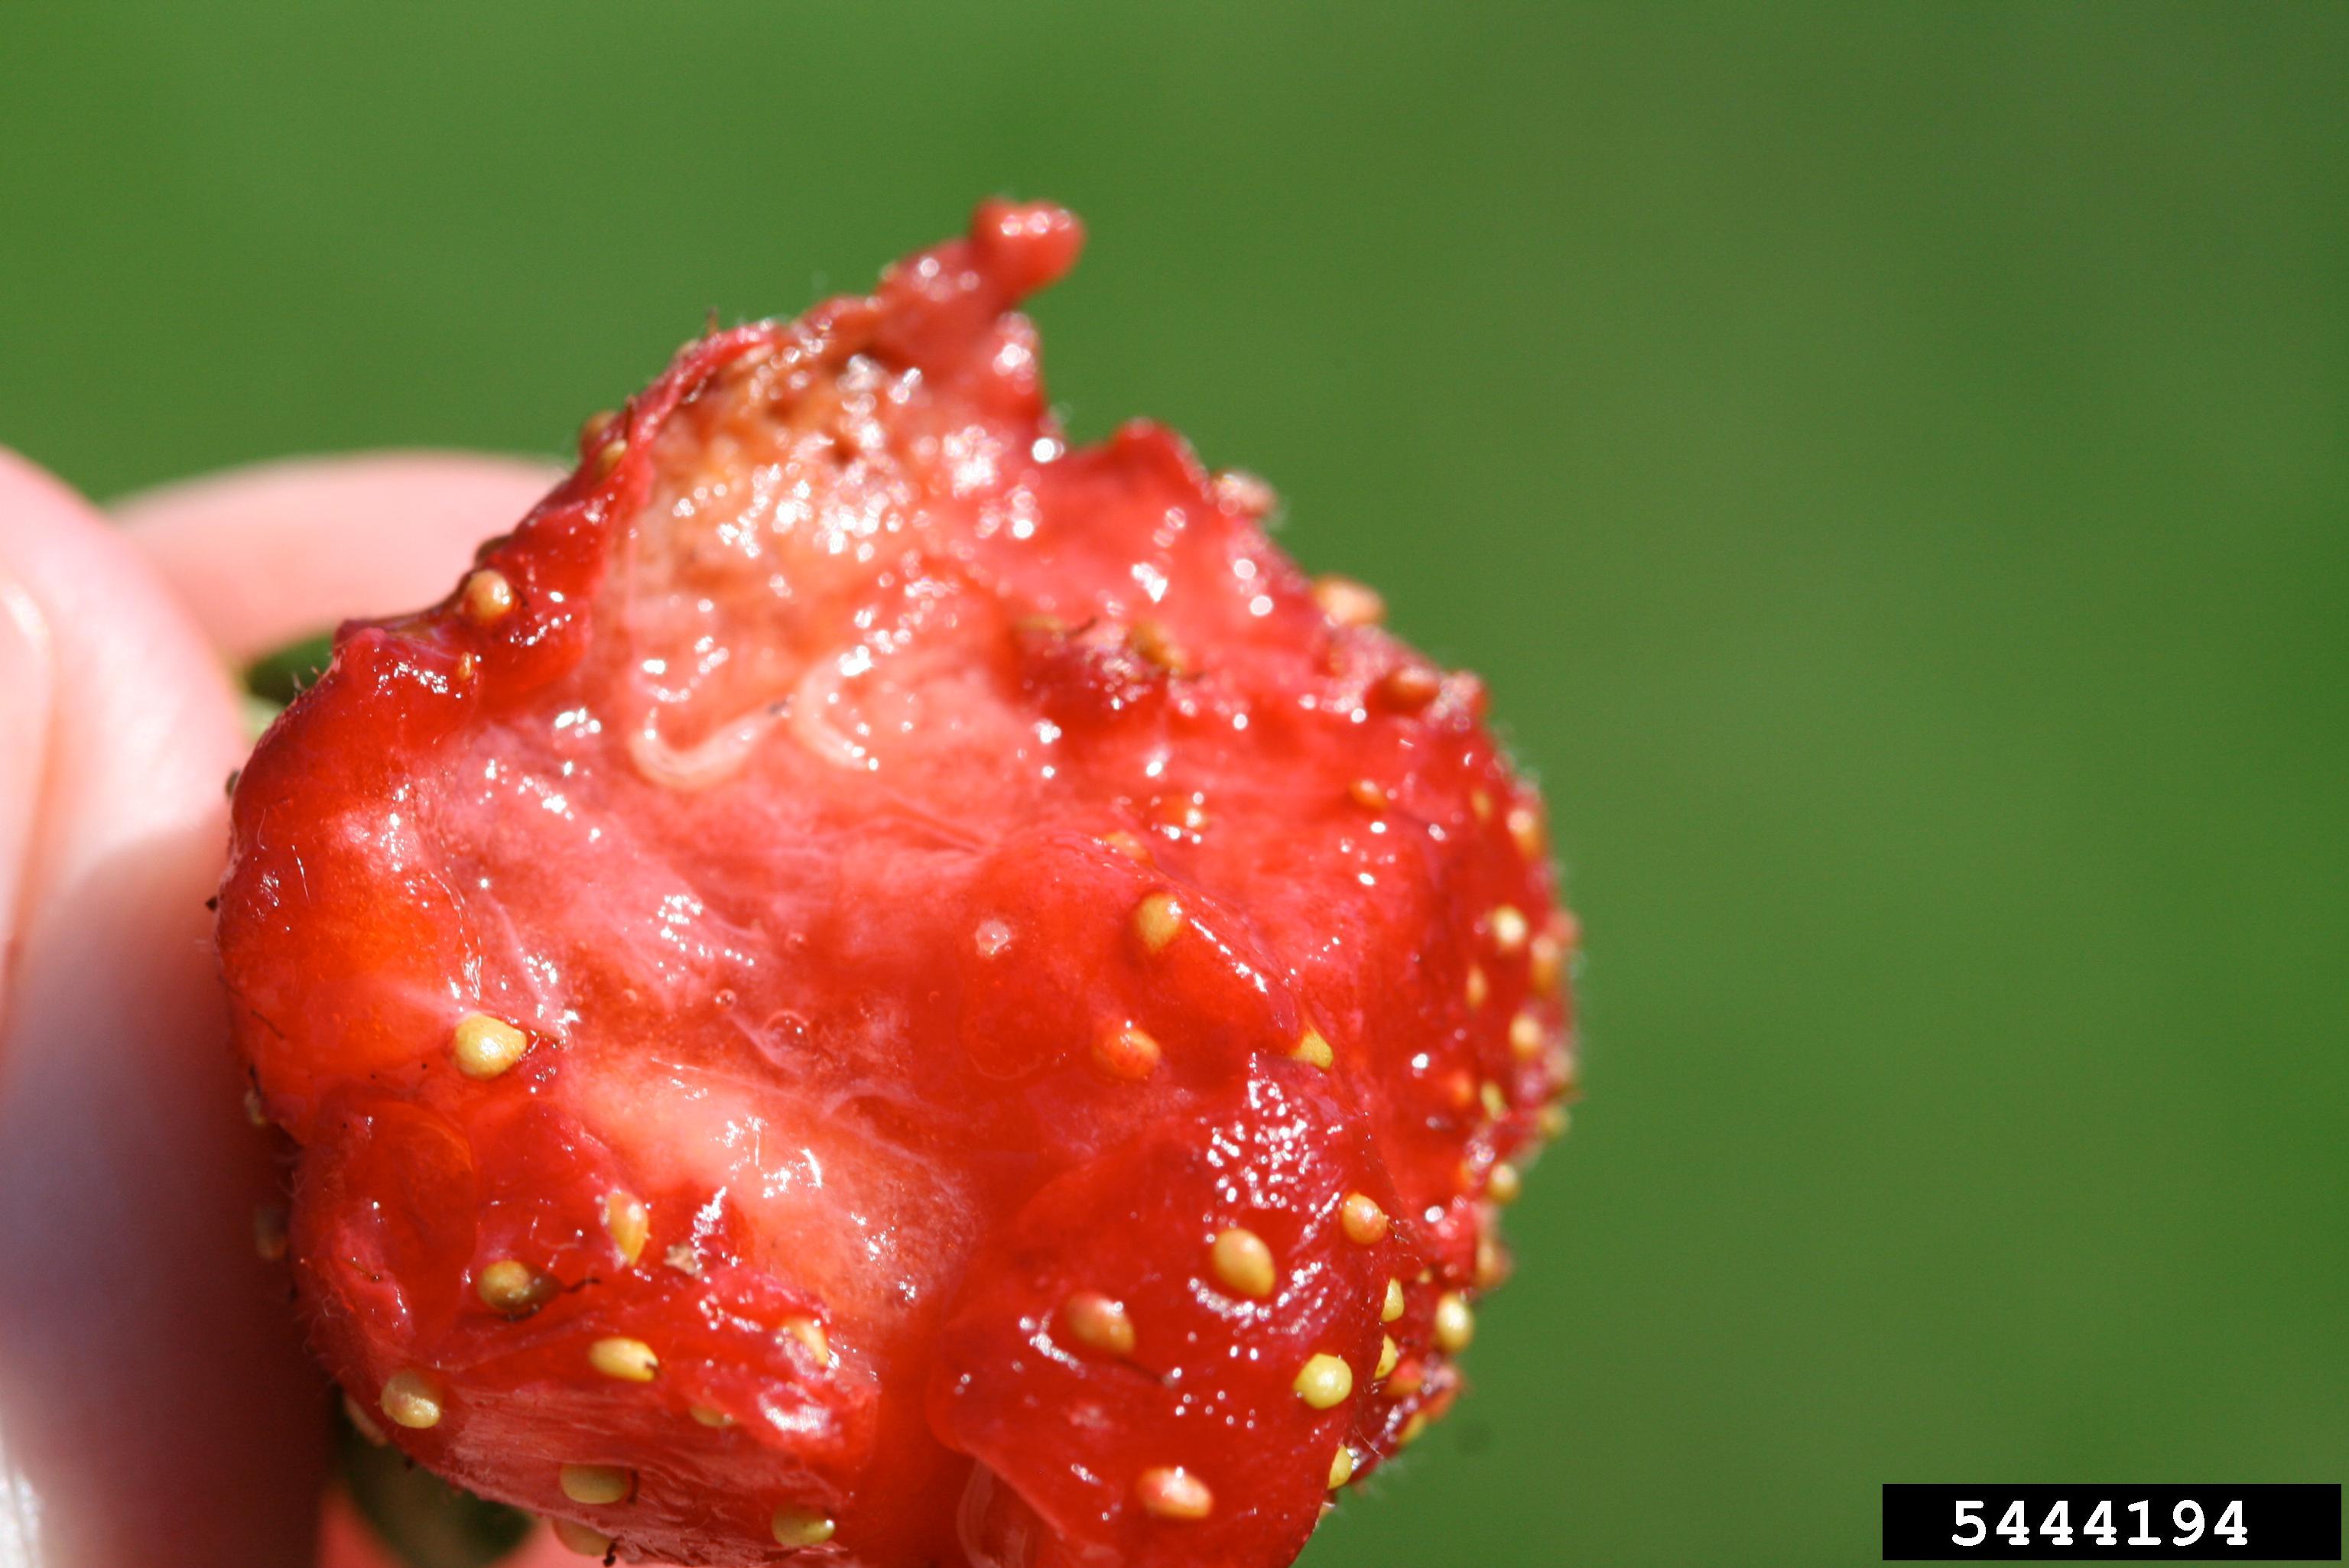 Strawberry fruit cut open to expose very small white larvae within the fruit